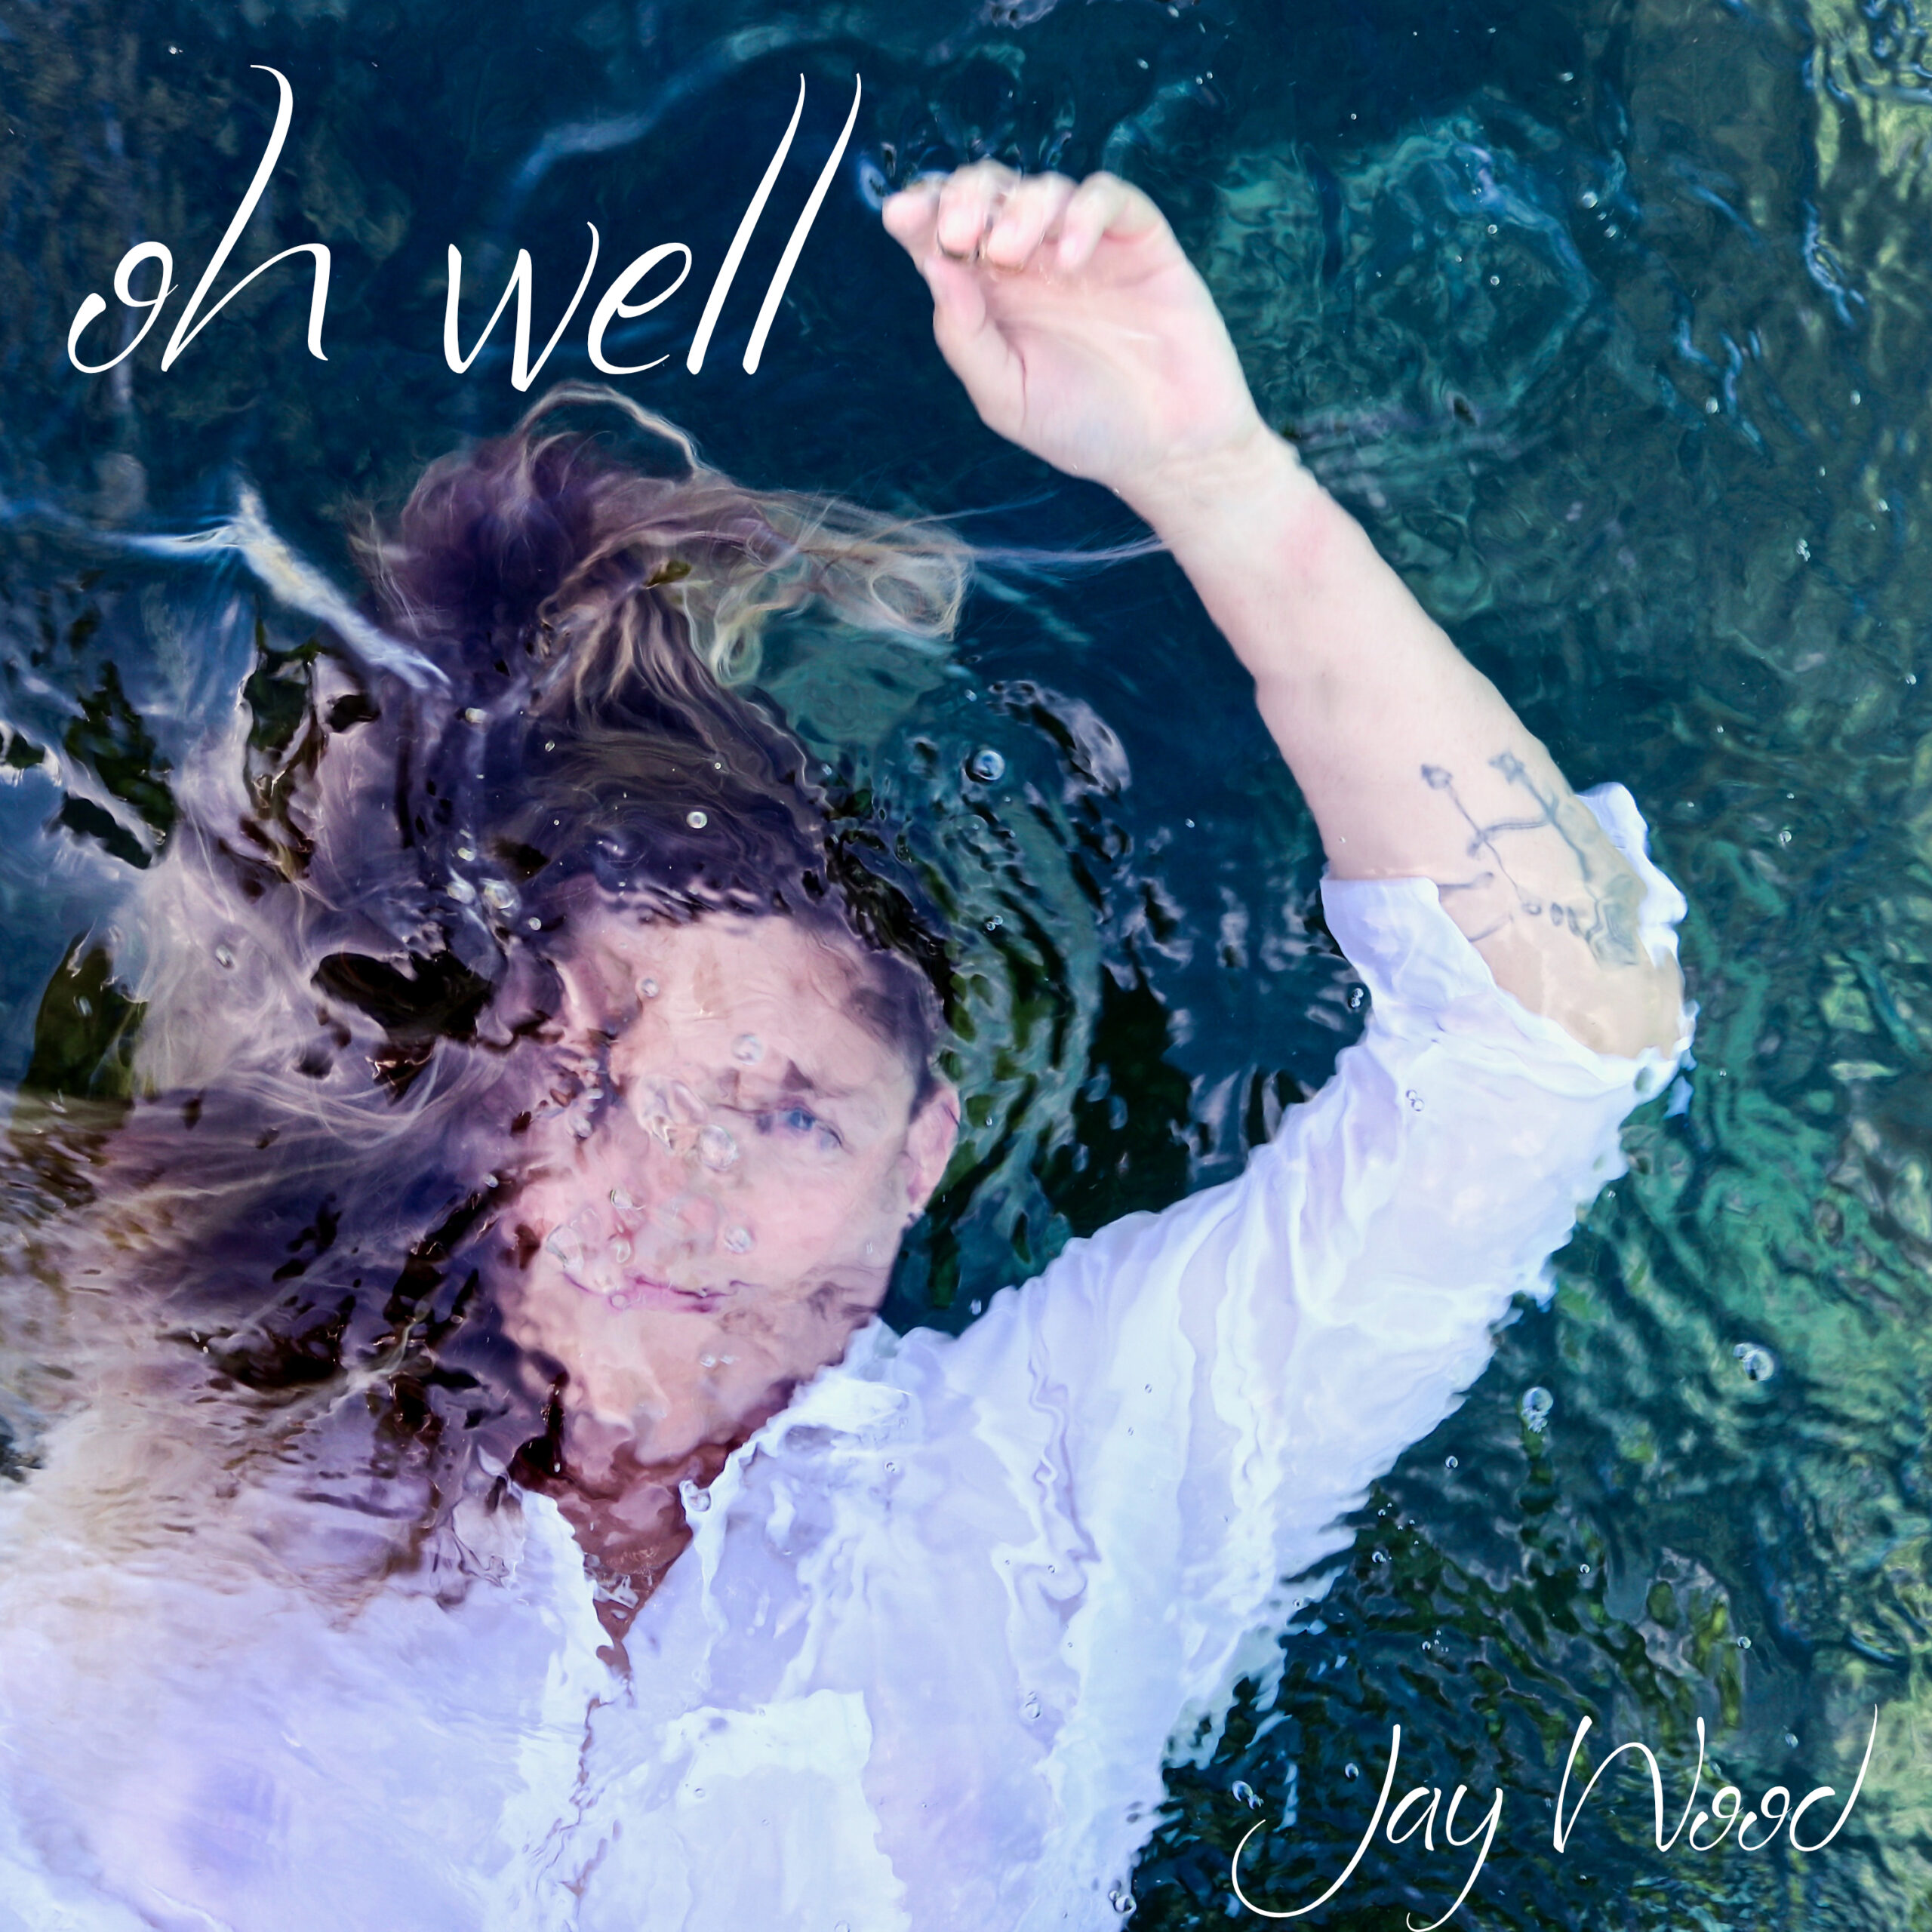 LISTEN: “Oh Well” by Jay Wood